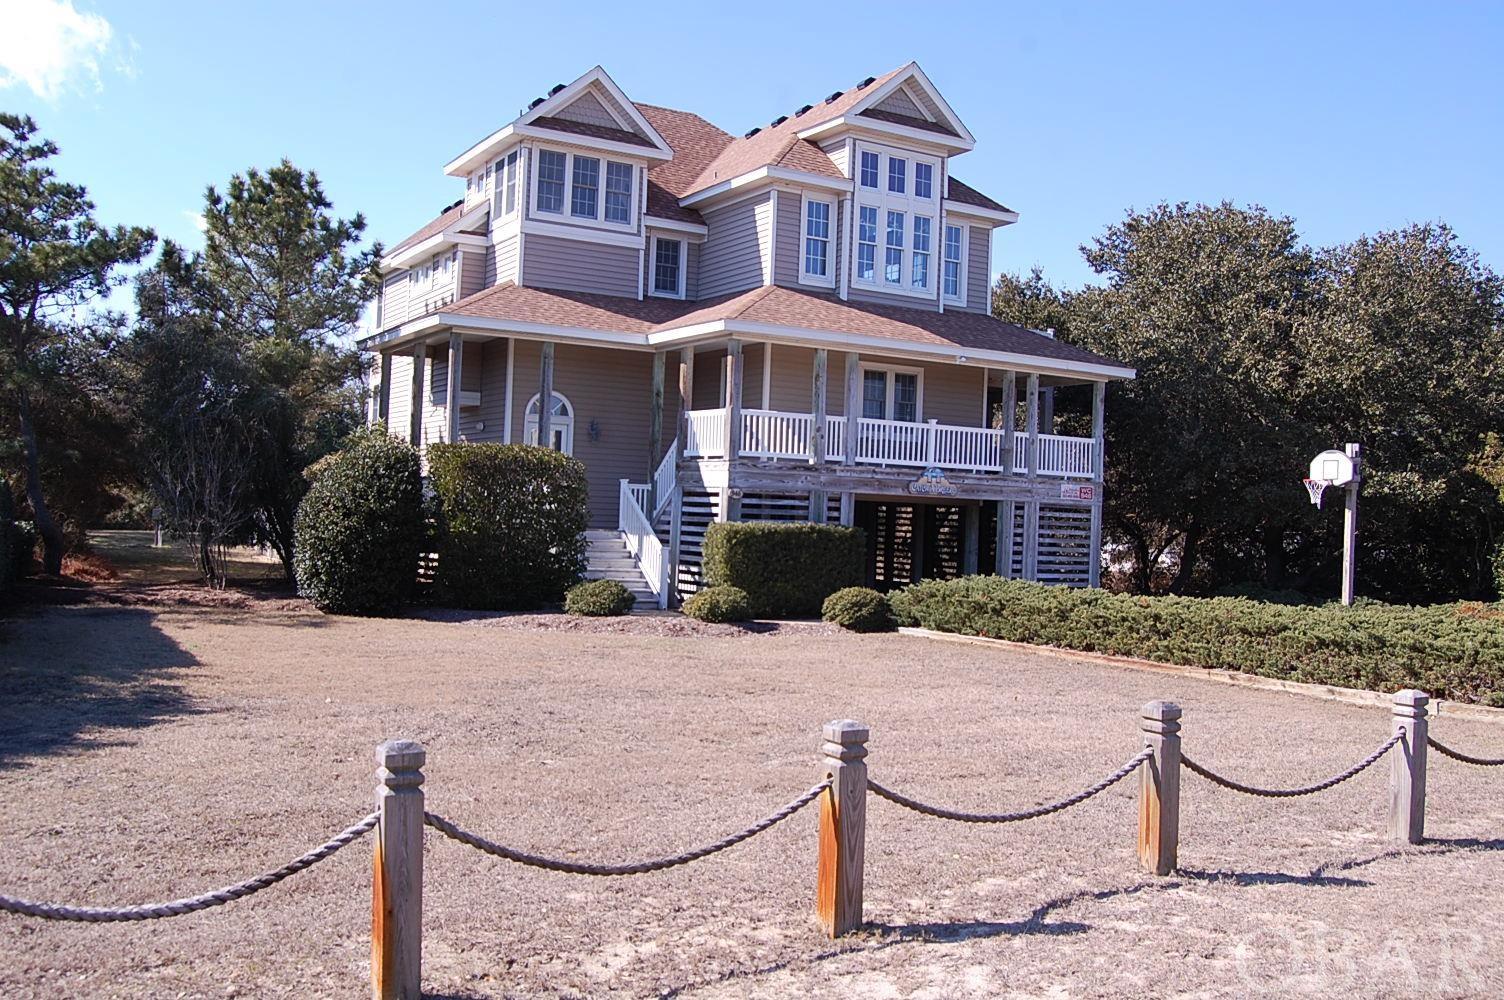 This custom-built home, located in the prestigious Whalehead Club in Corolla, just minutes to the beach. Offers direct beach access via walking path, located on corner lot, with ocean views. Two gas fireplaces, lots of decks, ships watch, 13x28 pool, large well equipped kitchen, spacious bedrooms, landscaping with irrigation. The outdoor area features large private pool, outdoor table perfect for enjoying meals hot off the grill. Conveniently located near world-class golf, dining, shopping and entertainment. This home was used as a personal get-away vs. maximizing rental income. They would blocked any rental bookings until the last week of May, and also reserved time in the summer for family use. This property has it all! Perfect for second home, investment property, or primary residence.